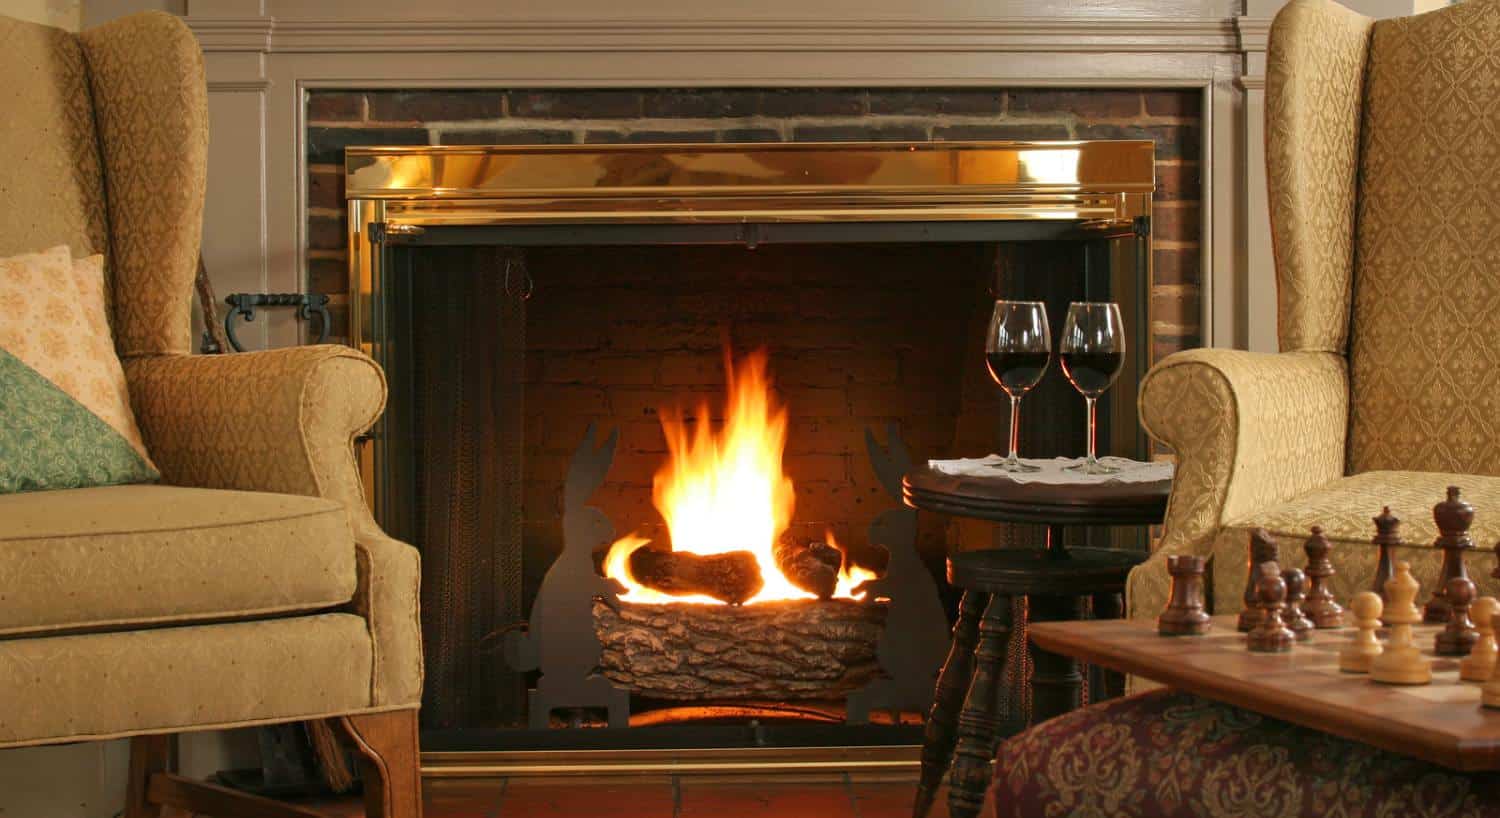 Close up view of sitting area with light-tan upholstered arm chairs, dark wooden stool, glasses full of wine, and a fireplace